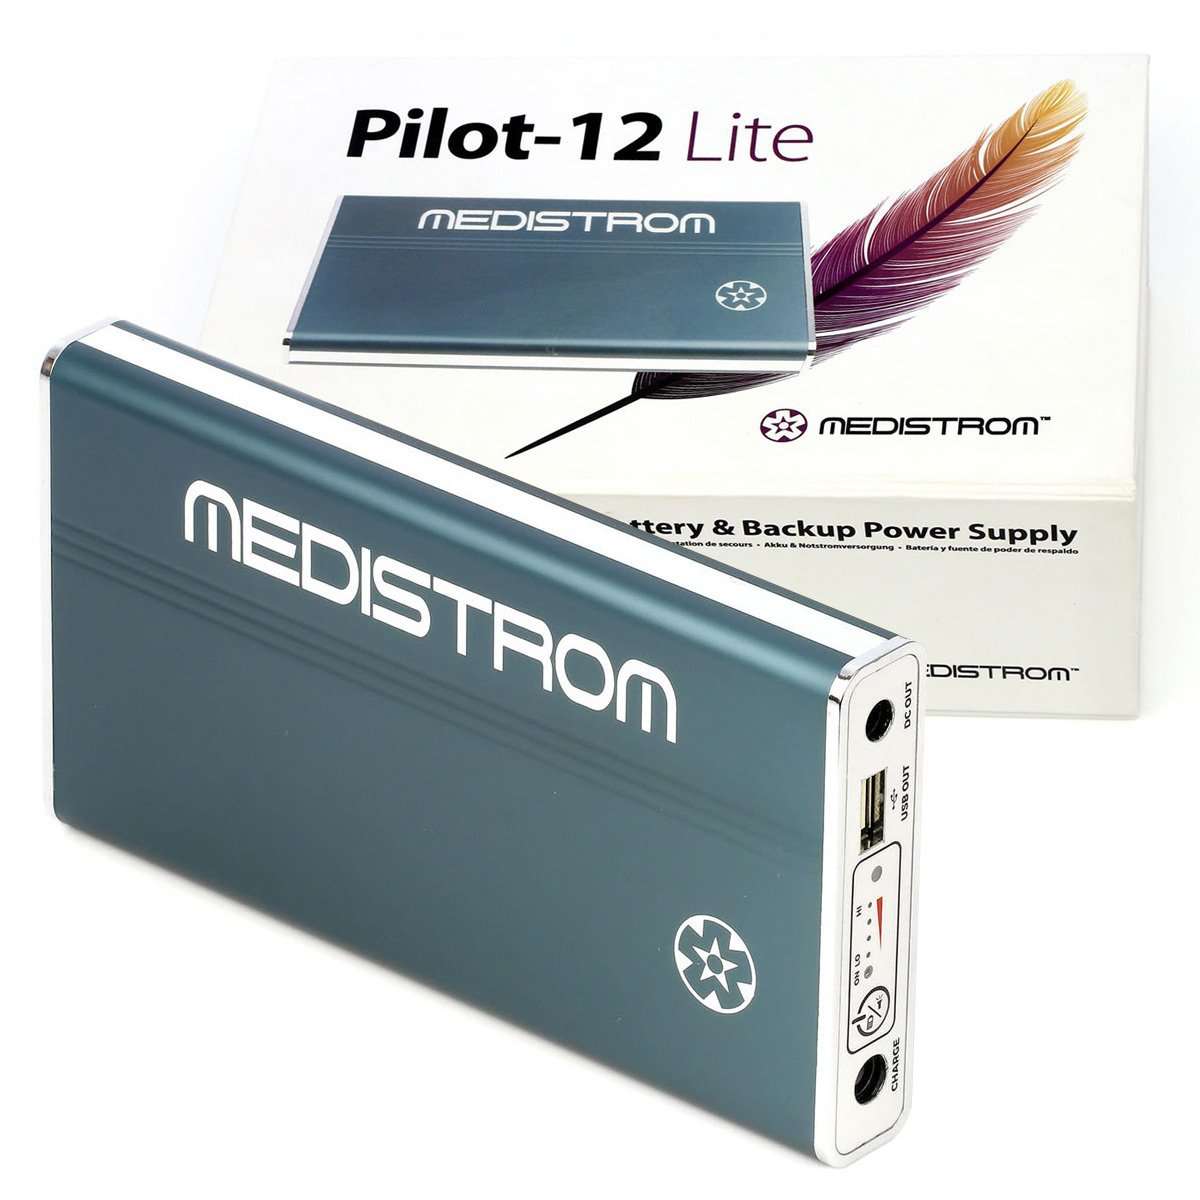 Medistrom P12MPLBP1 Pilot-12 Lite CPAP Battery and Backup Power Supply New